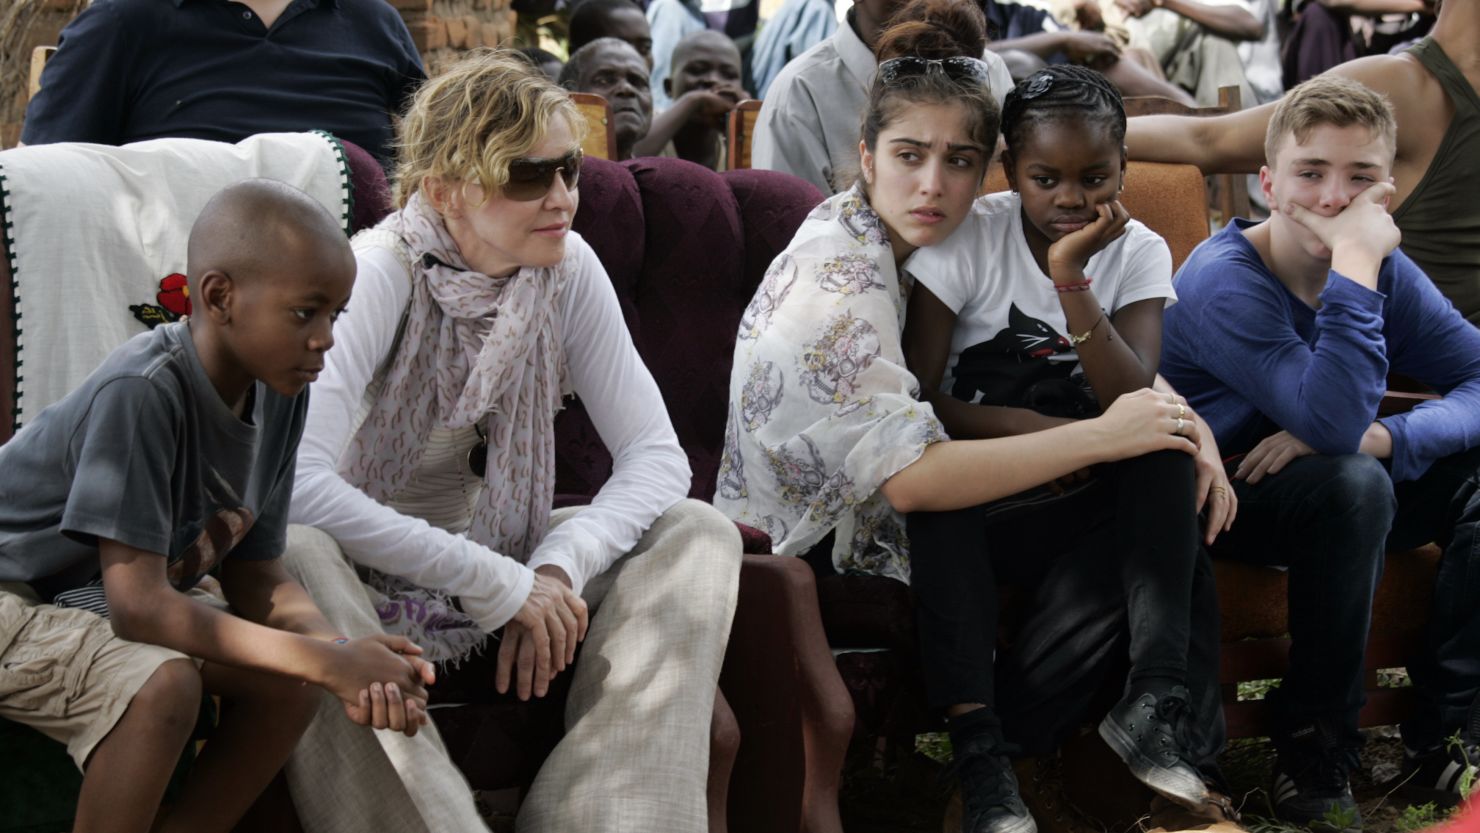 Madonna sits with her children (L to R) David Banda, Lourdes, Mercy James, and Rocco at Mkoko Primary School, one of the schools Madonna's Raising Malawi organization on April 2, 2013.